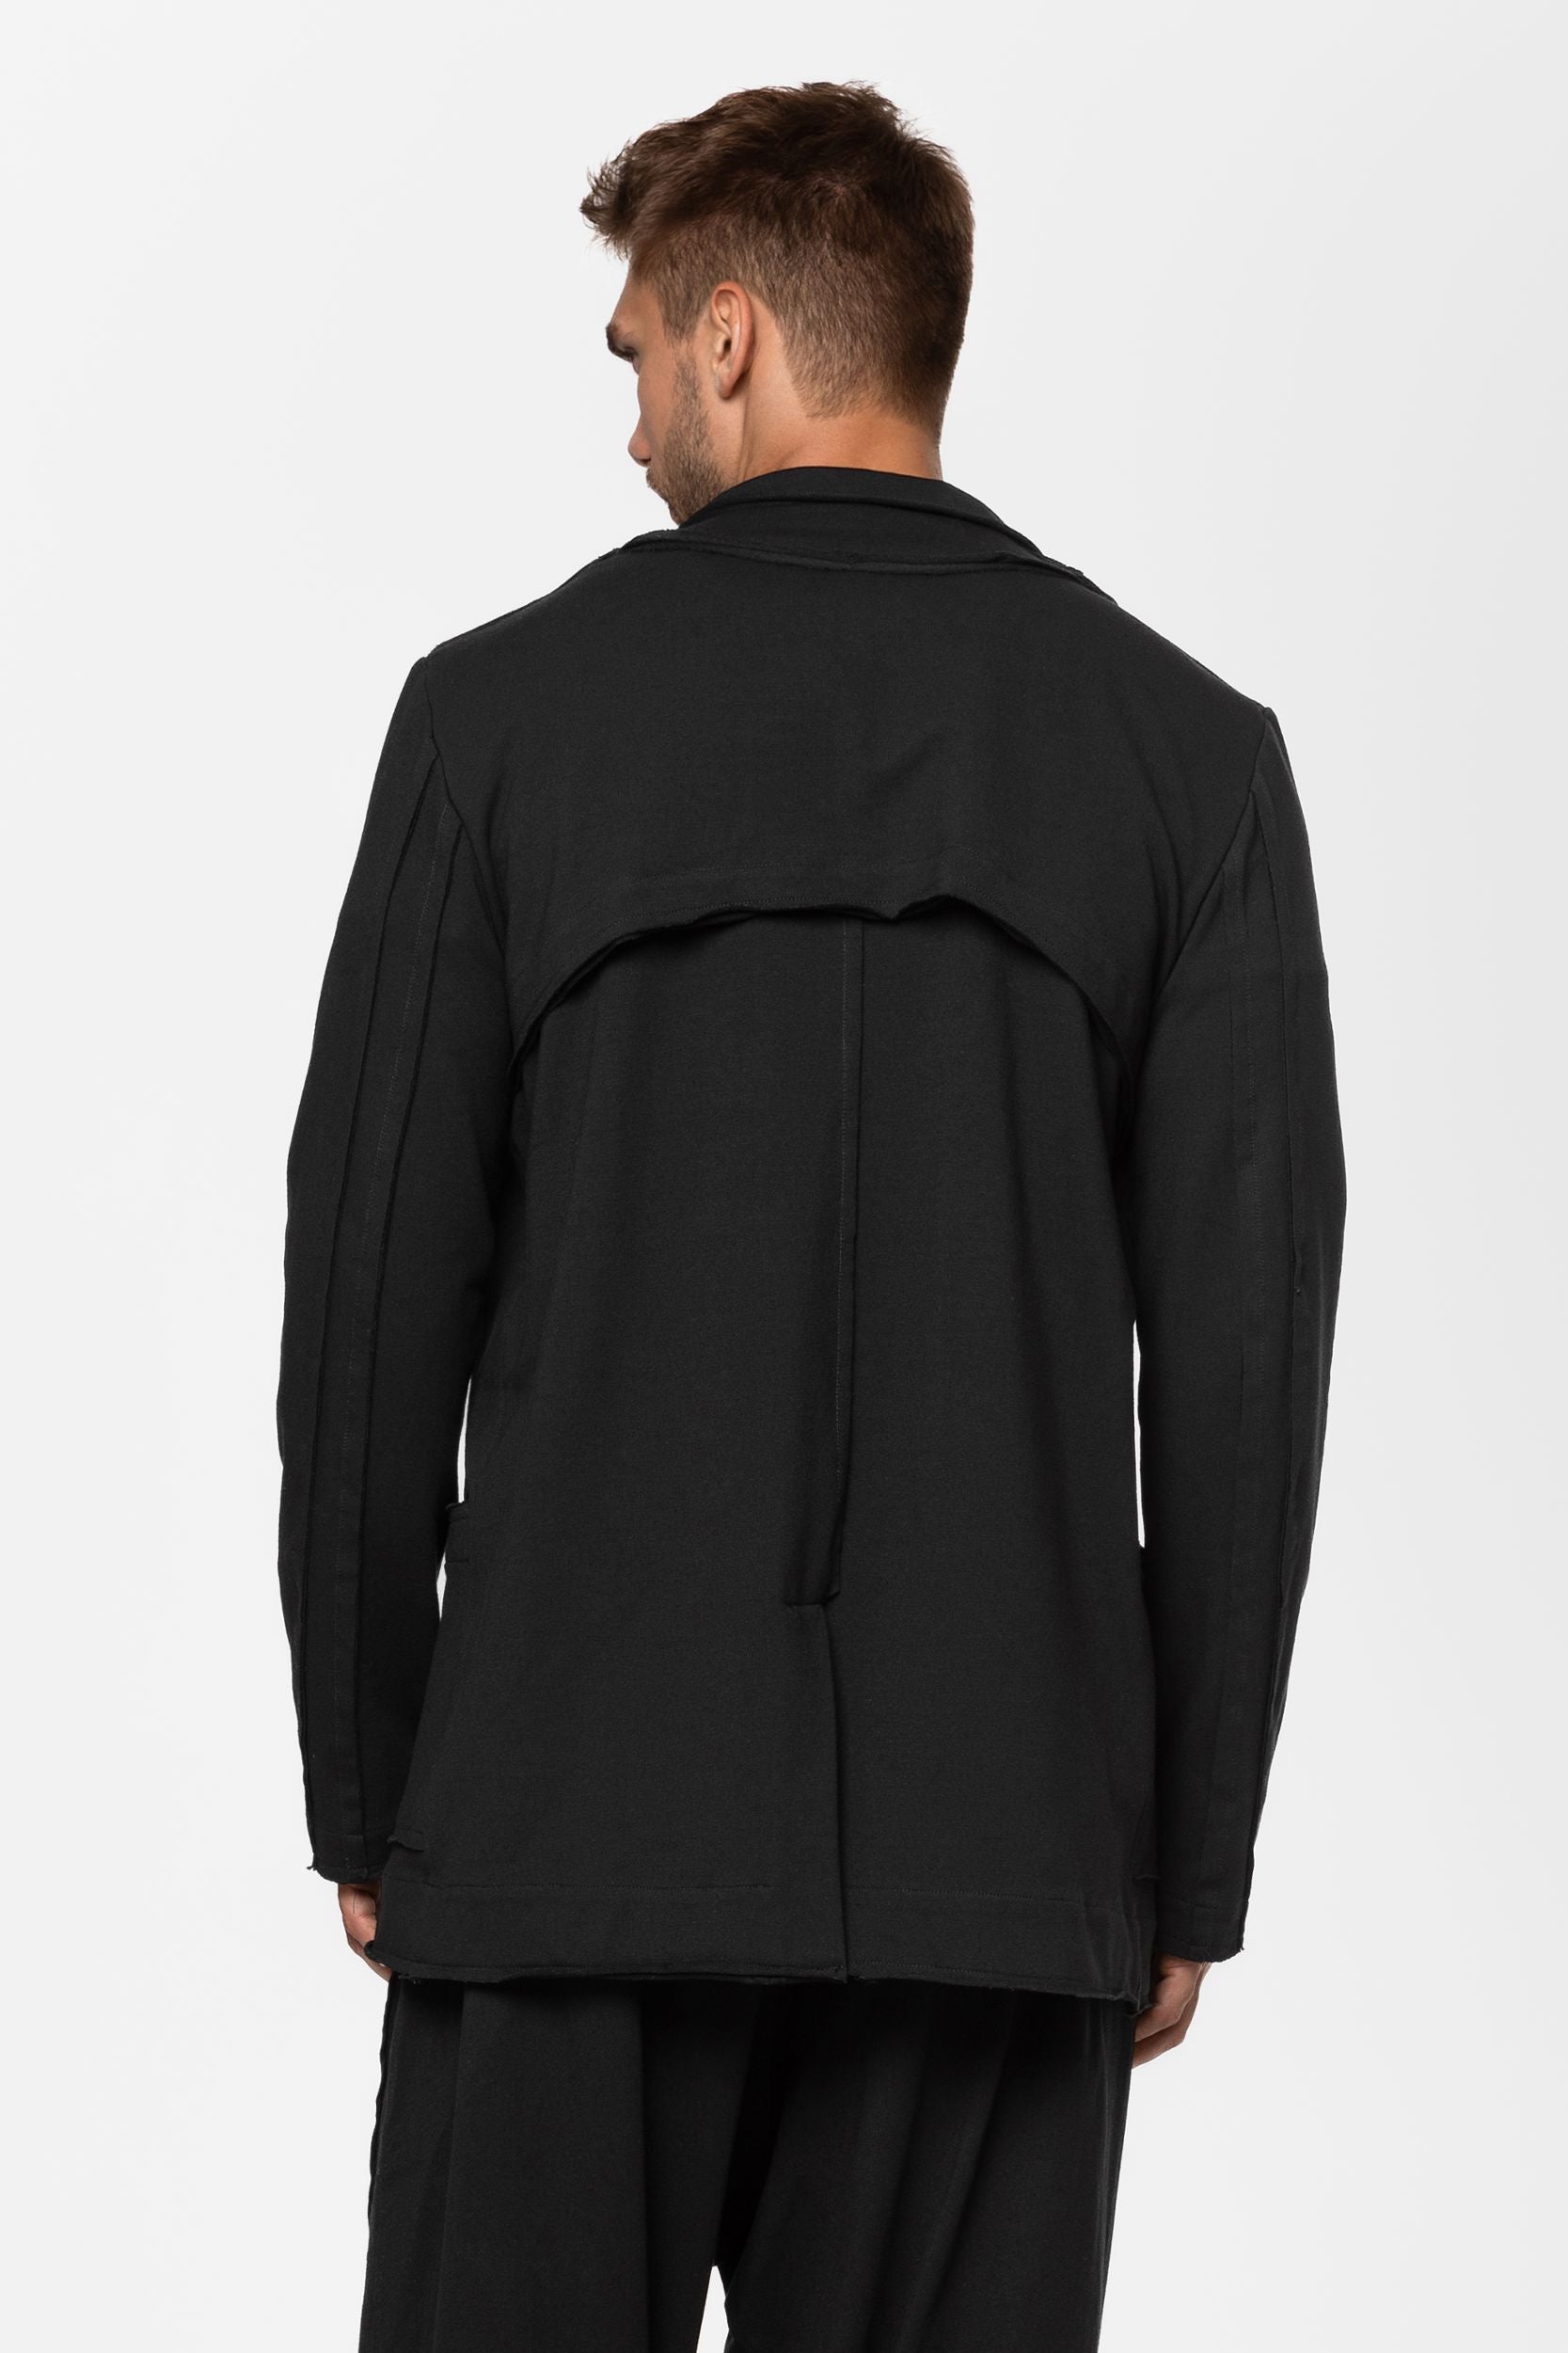 MDNT45 Unbrecable cotton jersey jacket